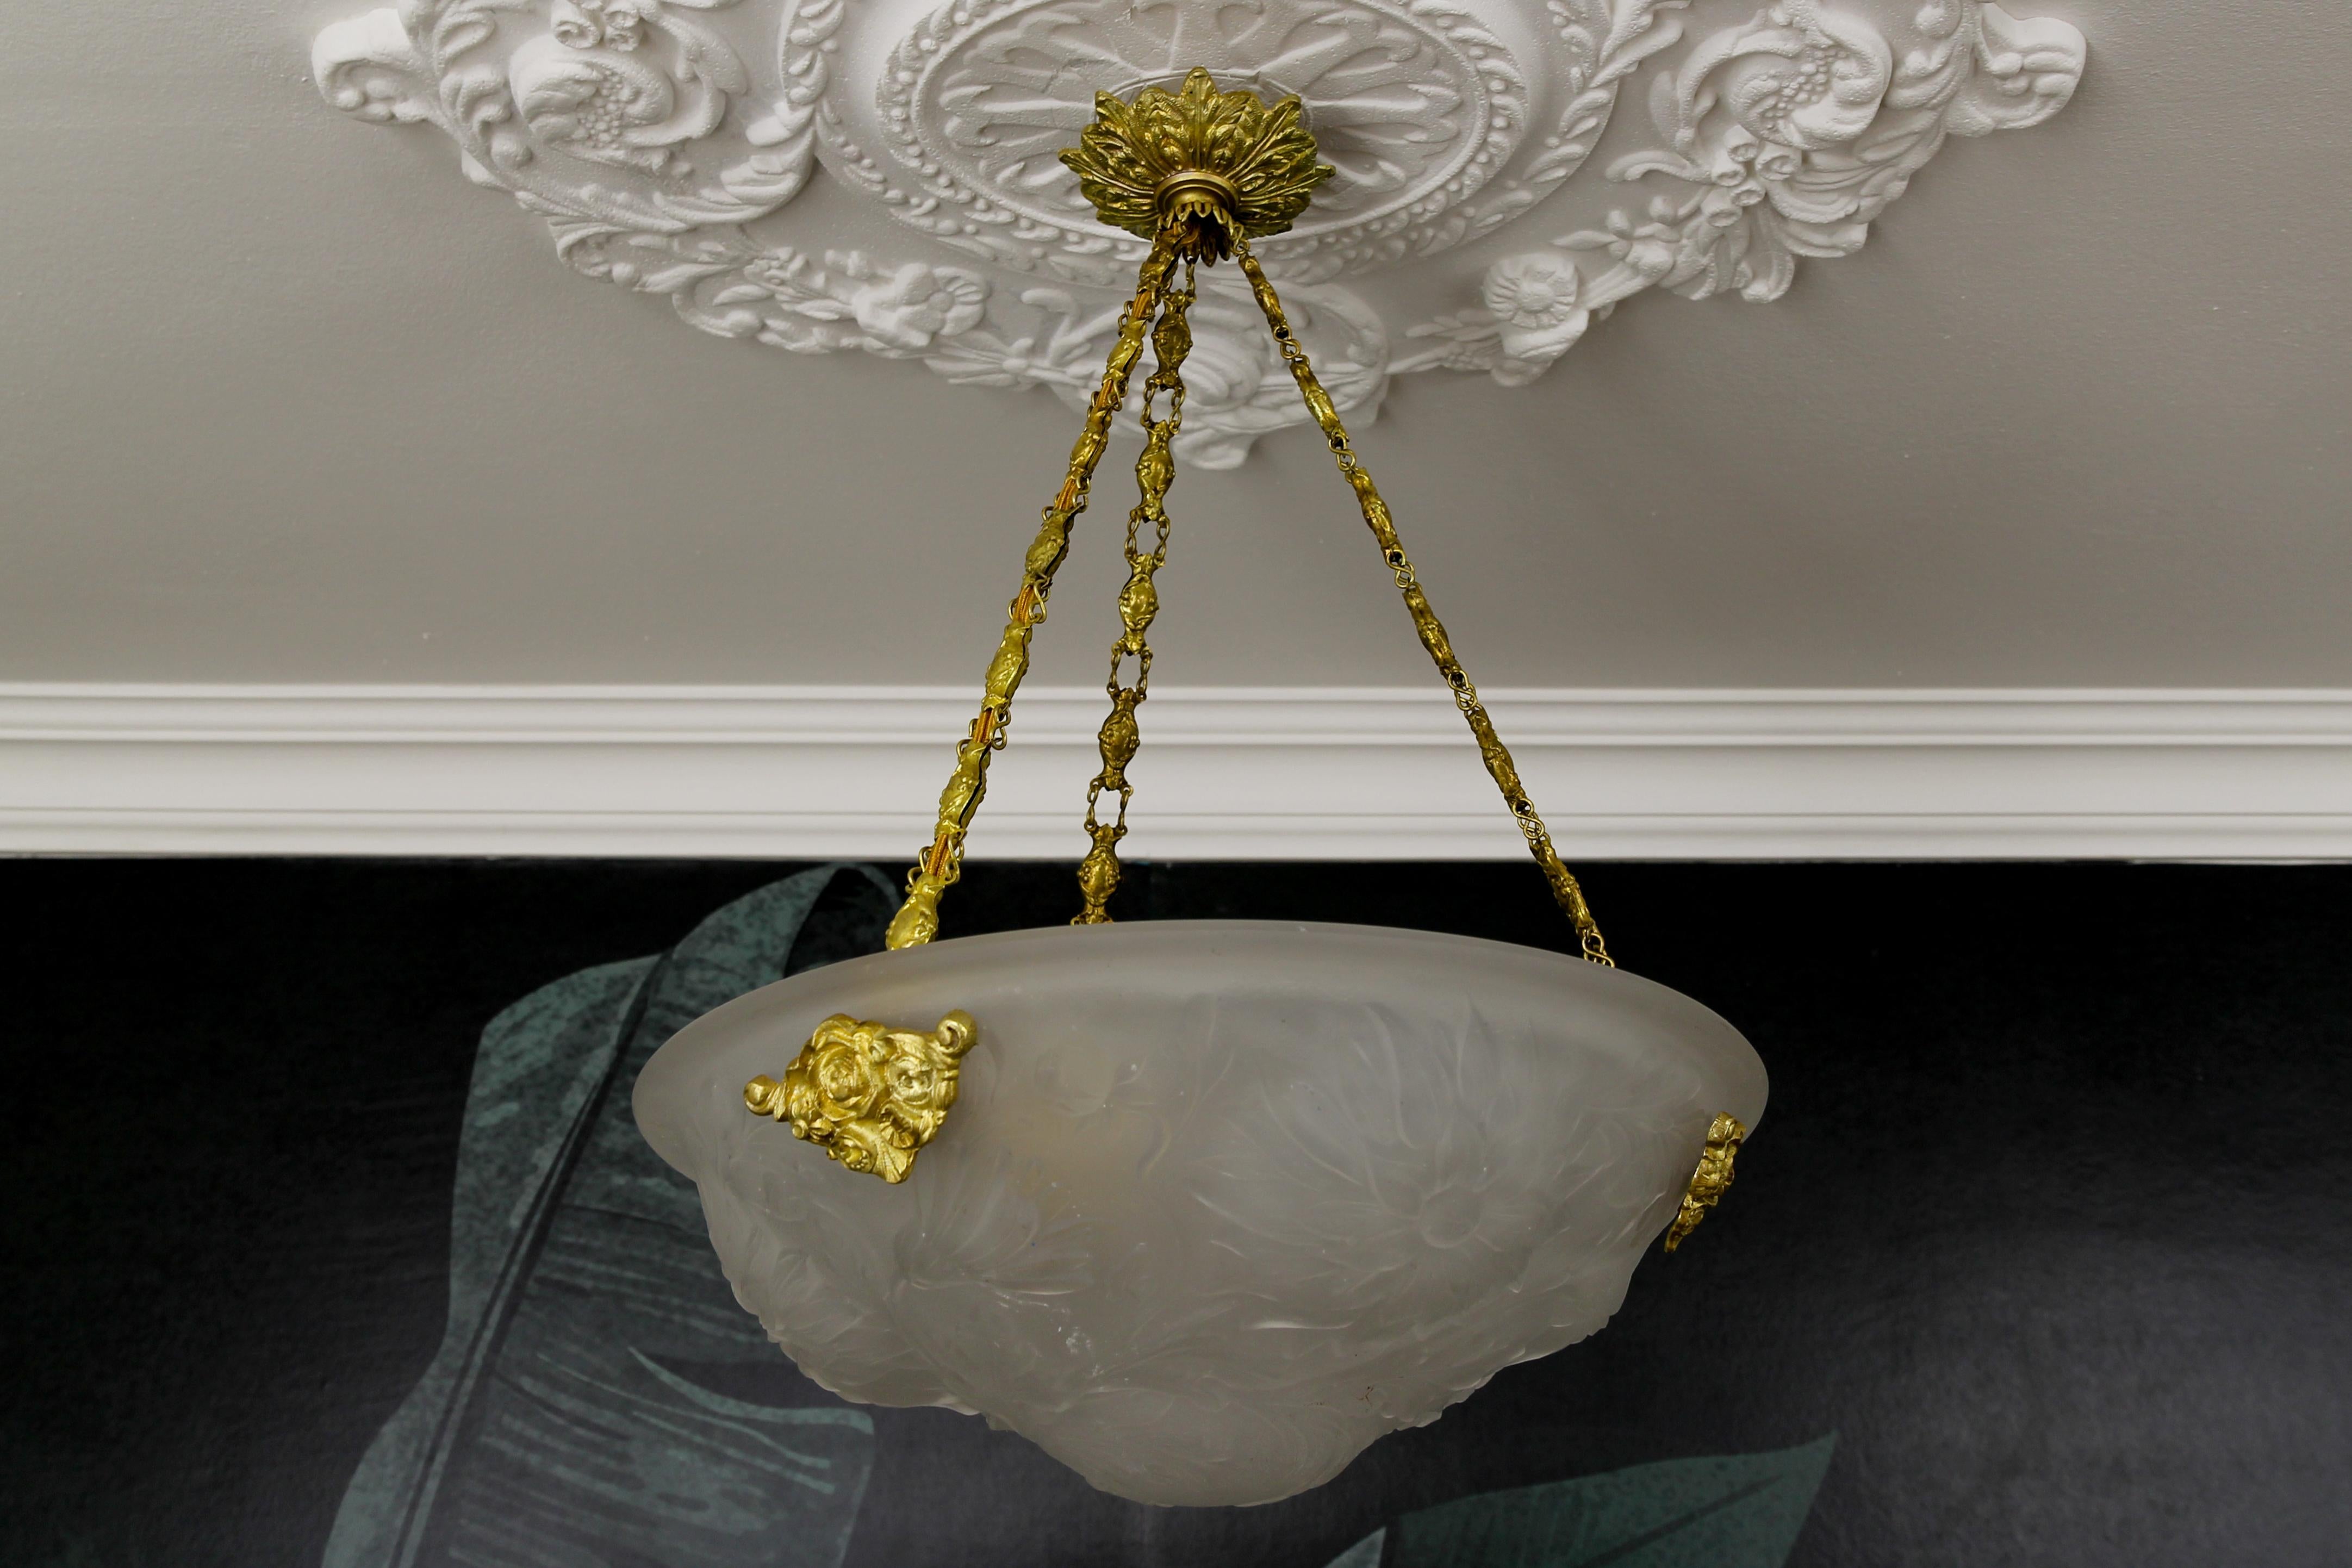 A beautiful French Art Deco single-light pendant light fixture with white frosted glass shade from circa the 1930s.
This beautifully shaped white frosted glass bowl features floral motifs hung at three decorative chains, attached with adorable